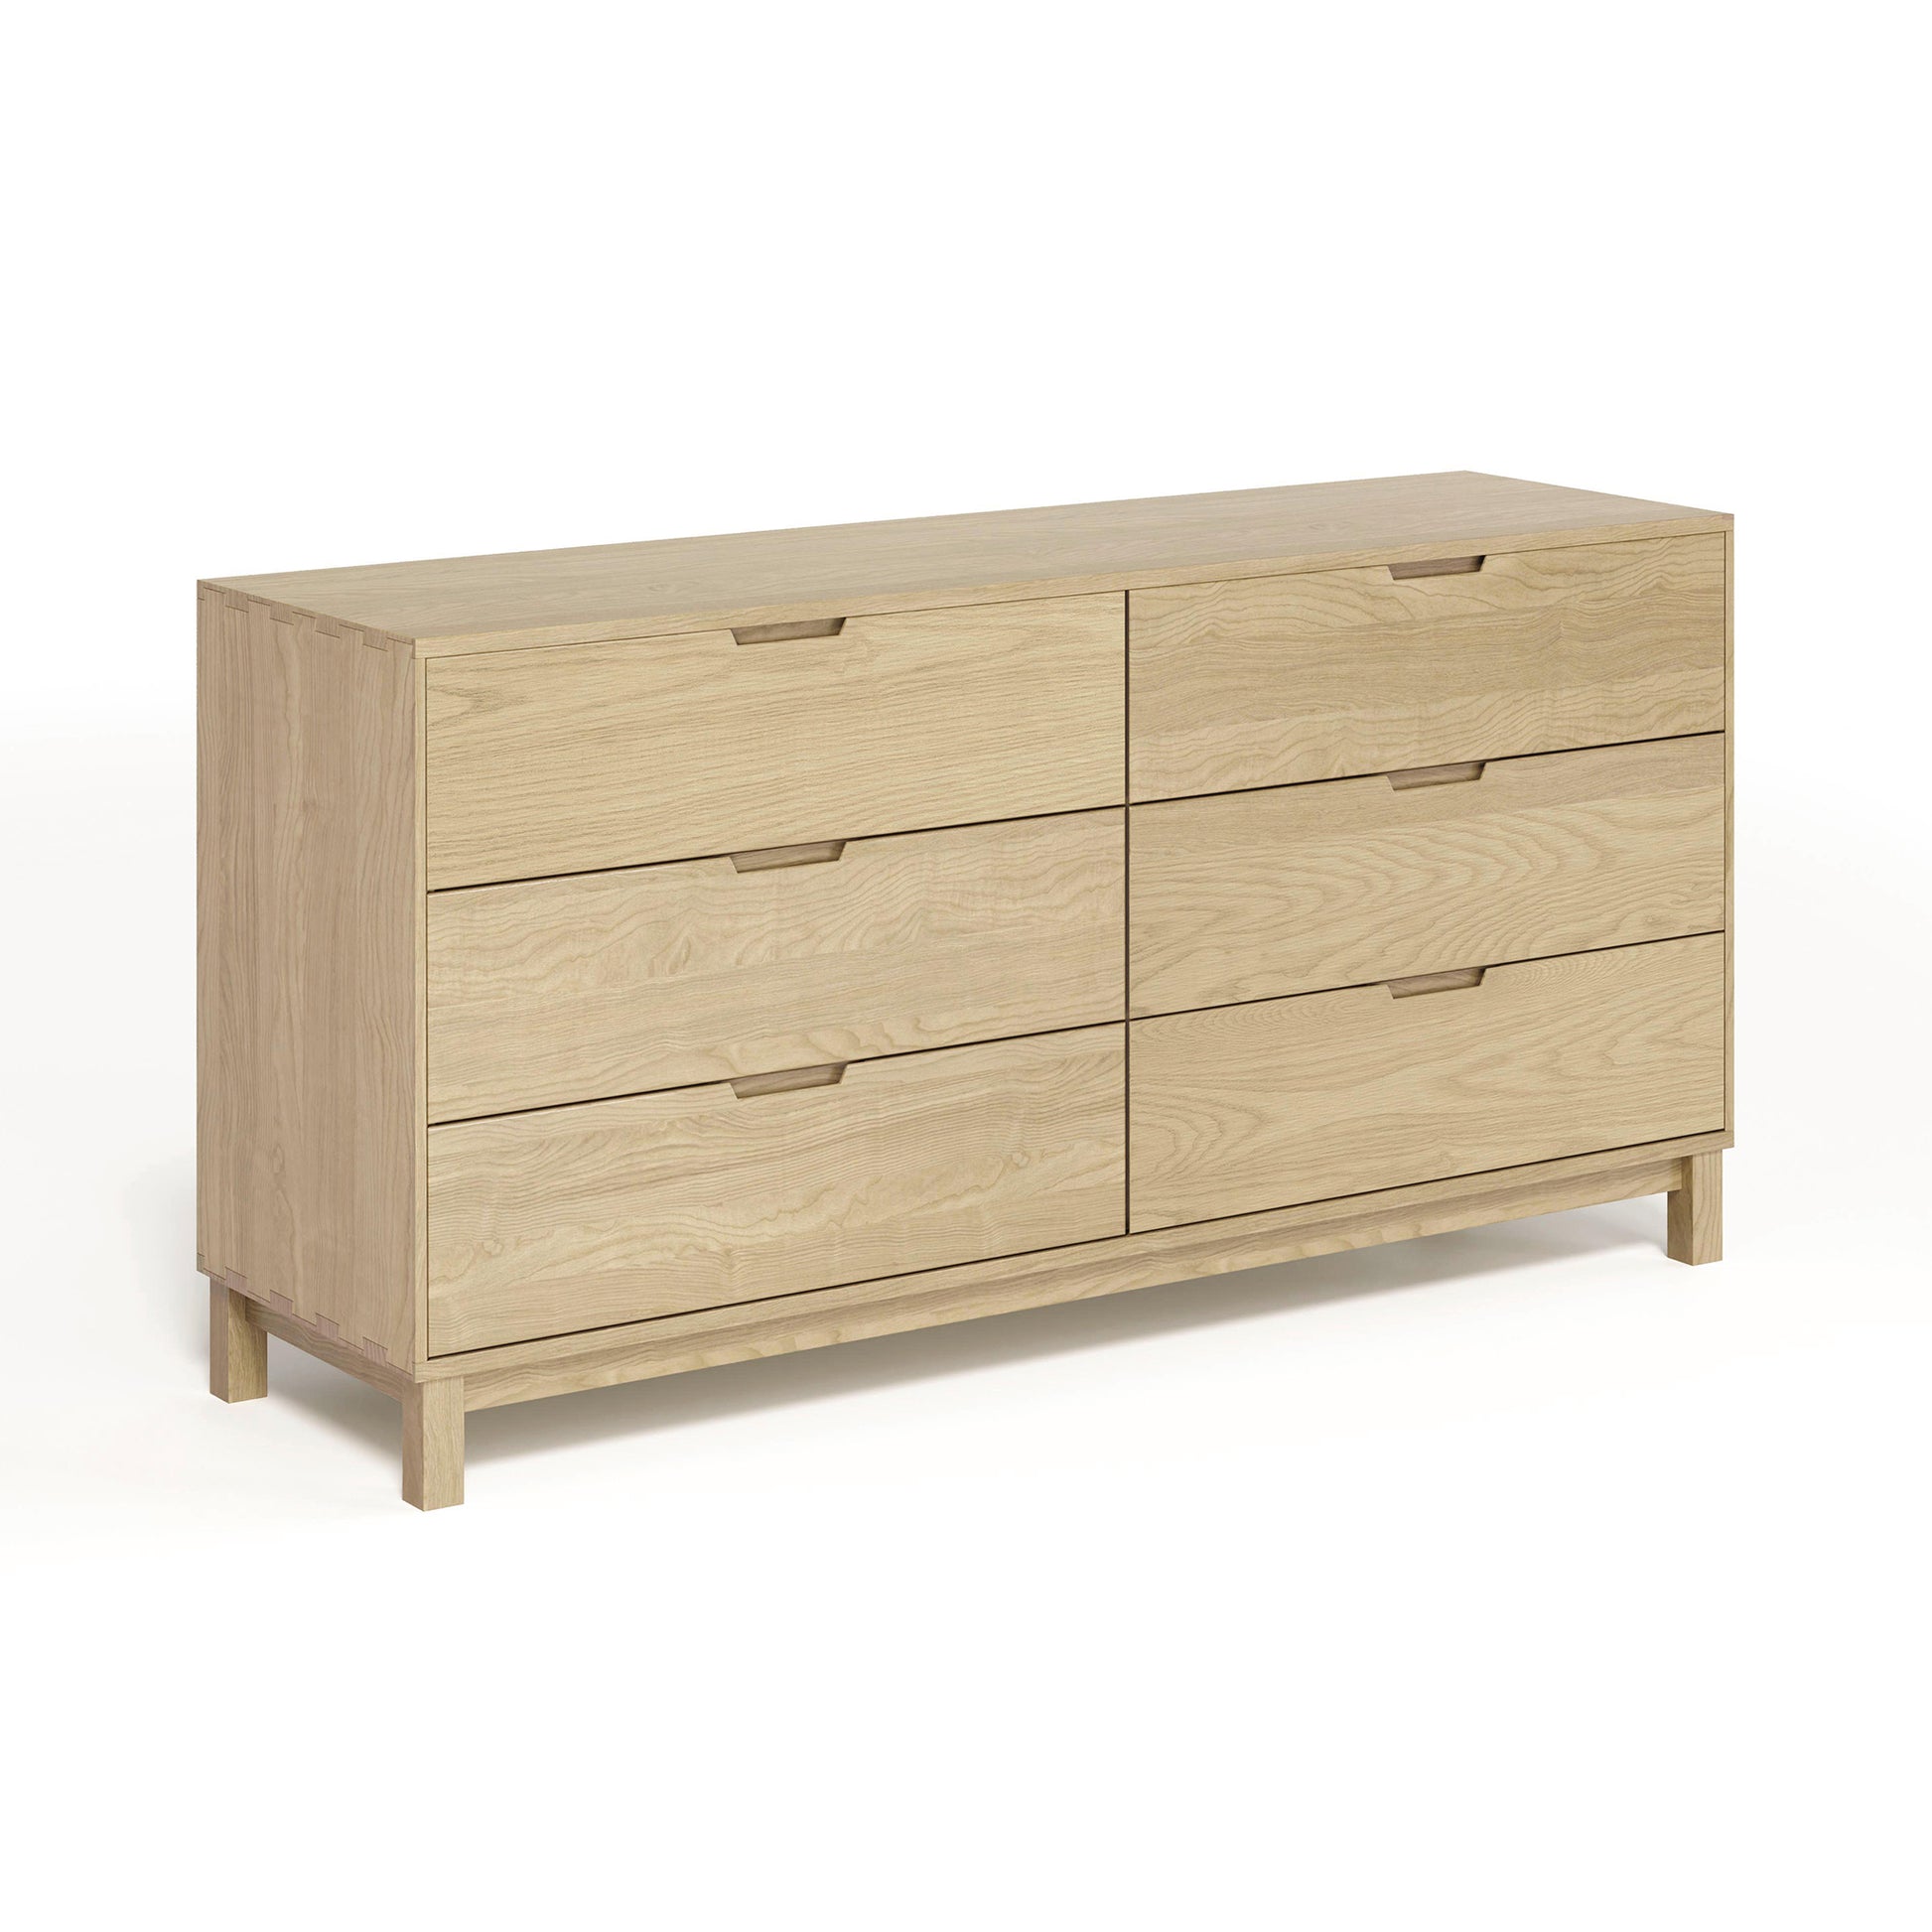 A modern Oslo 6-Drawer Dresser by Copeland Furniture on a white background.